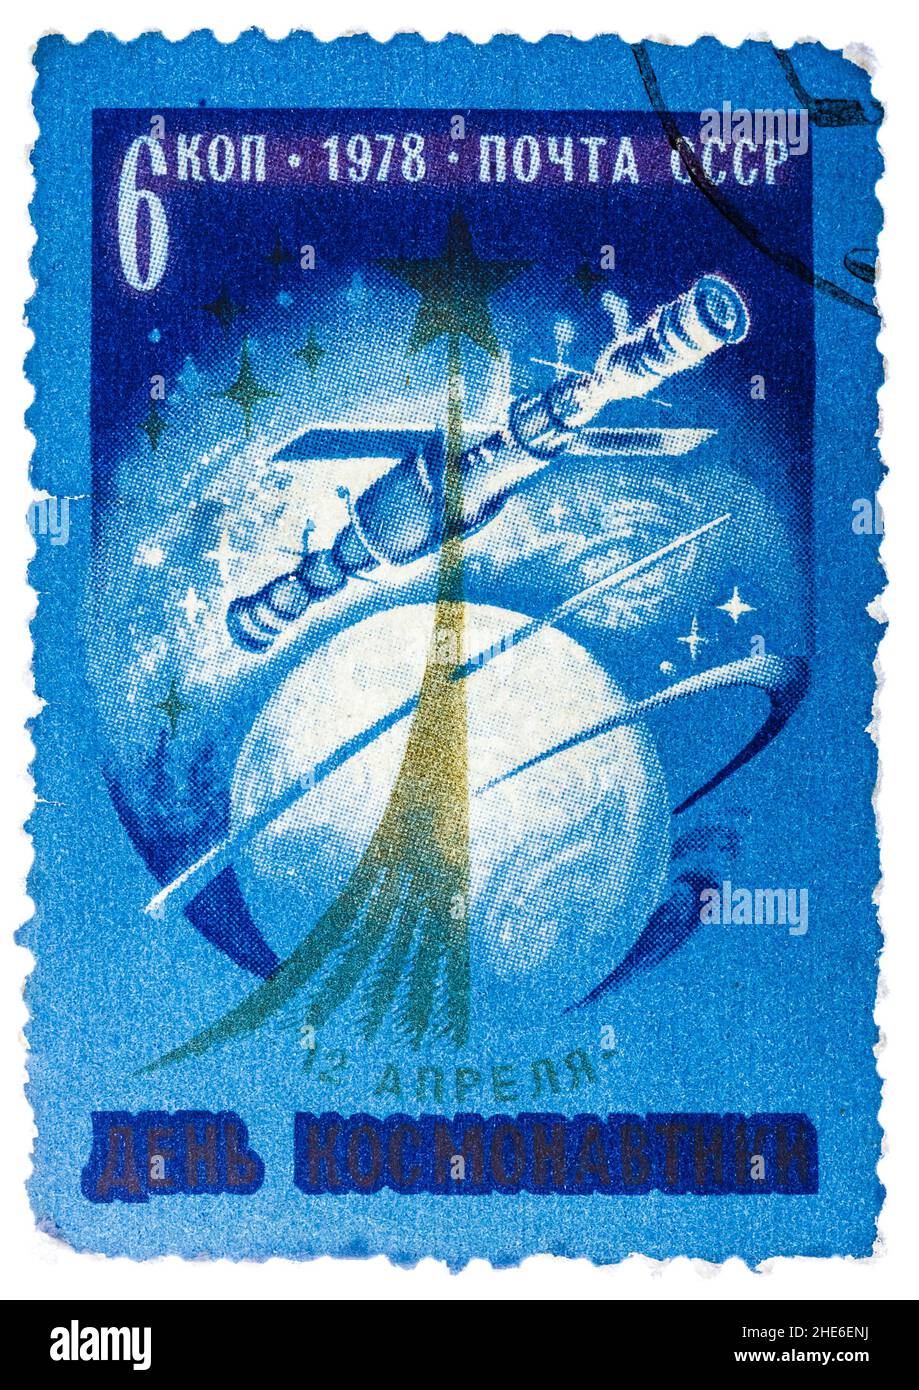 Stamp printed in USSR, day of space exploration, space station union, spacecraft, Stock Photo